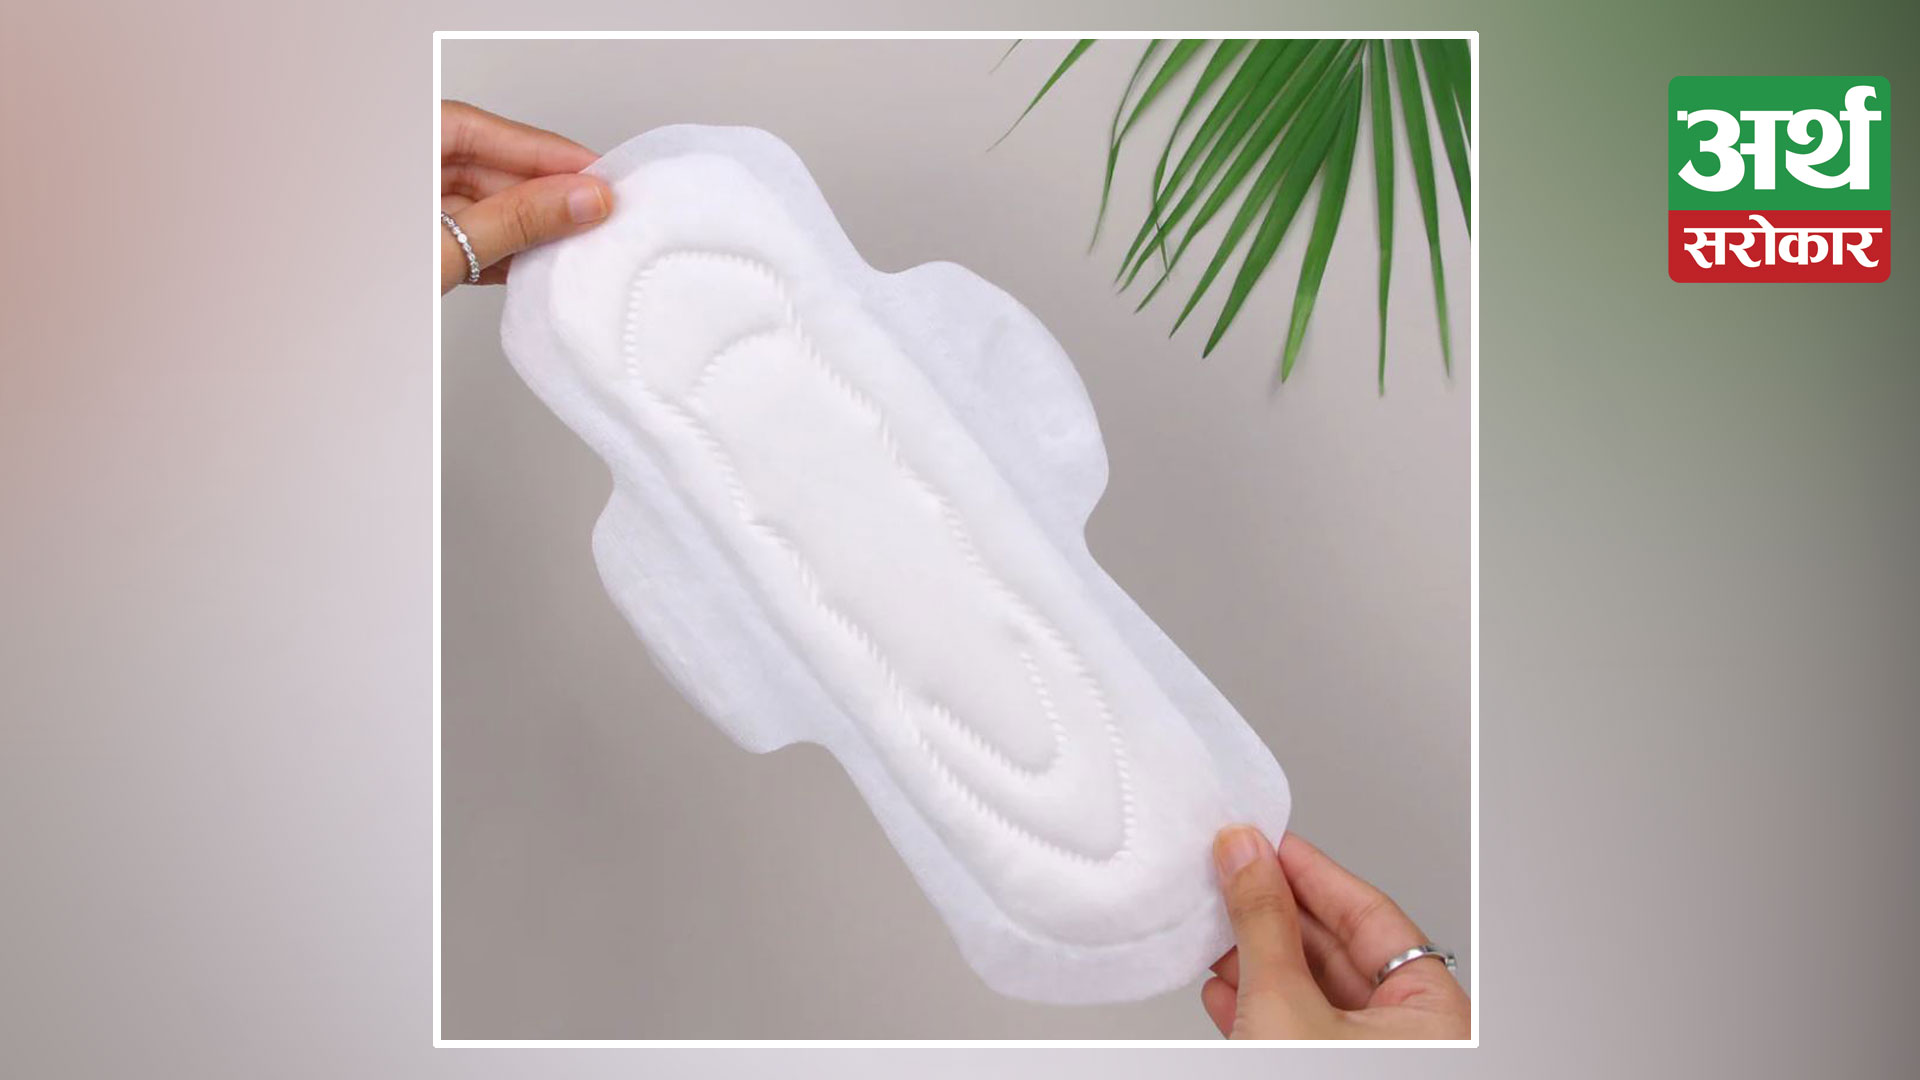 Taxation issue on sanitary pad yet to be fully addressed, lawmakers say